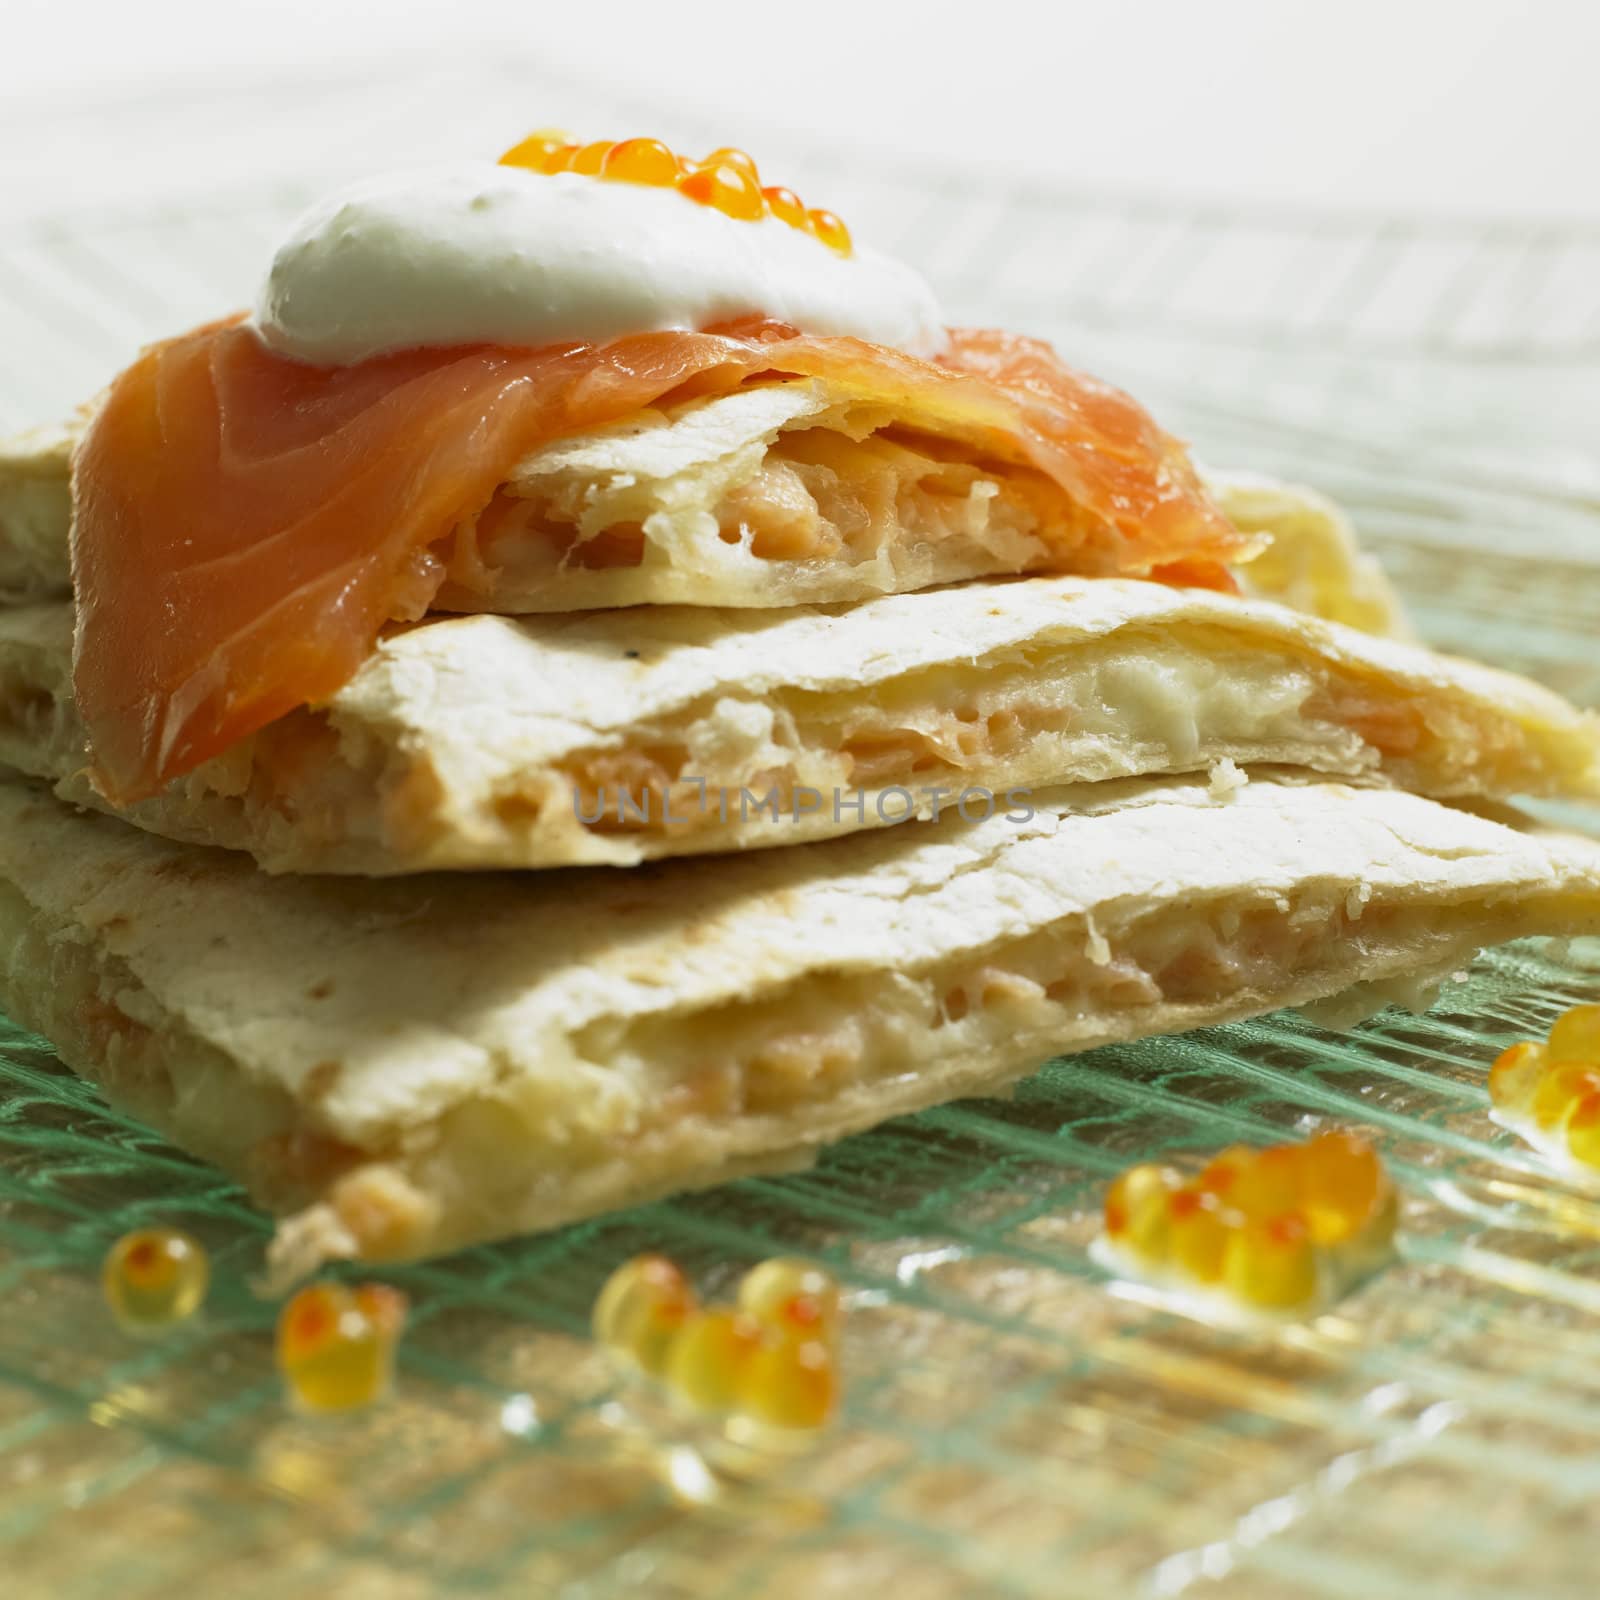 quesadilla with smoked salmon by phbcz